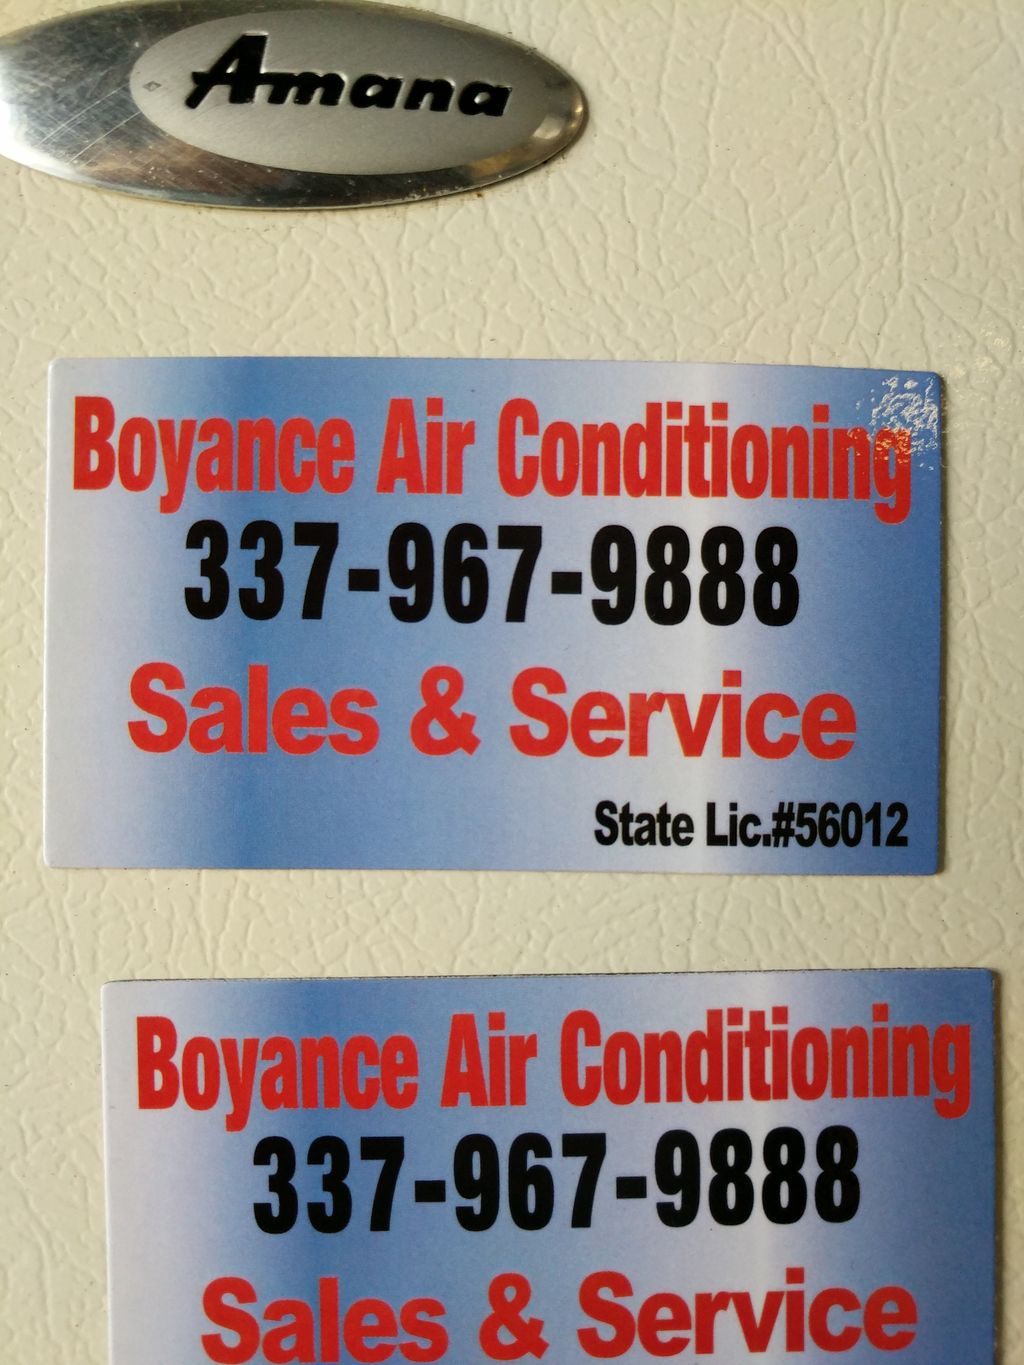 Boyance Air Conditioning